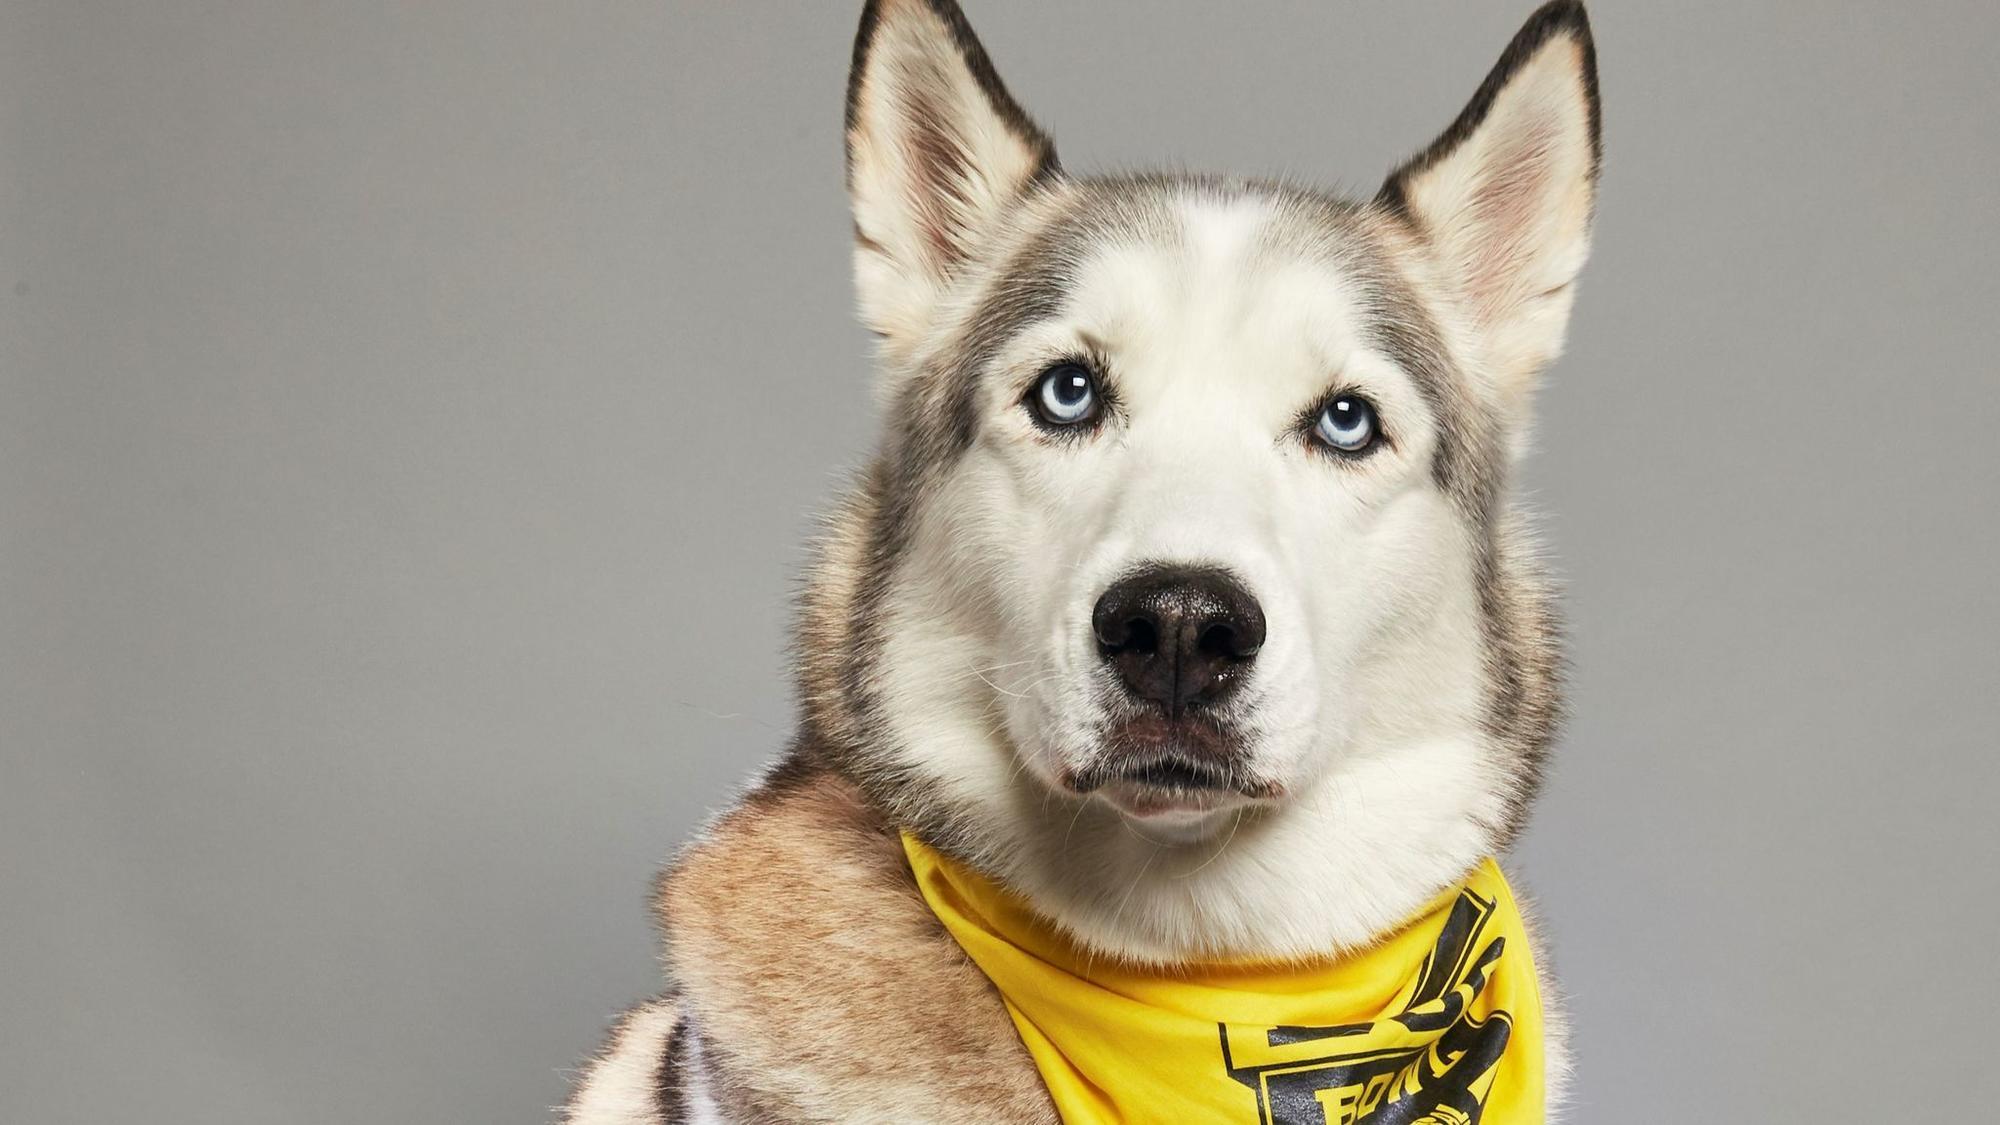 Nanook was once a Siberian Husky in peril. Now, he's about to play doggie football on ...